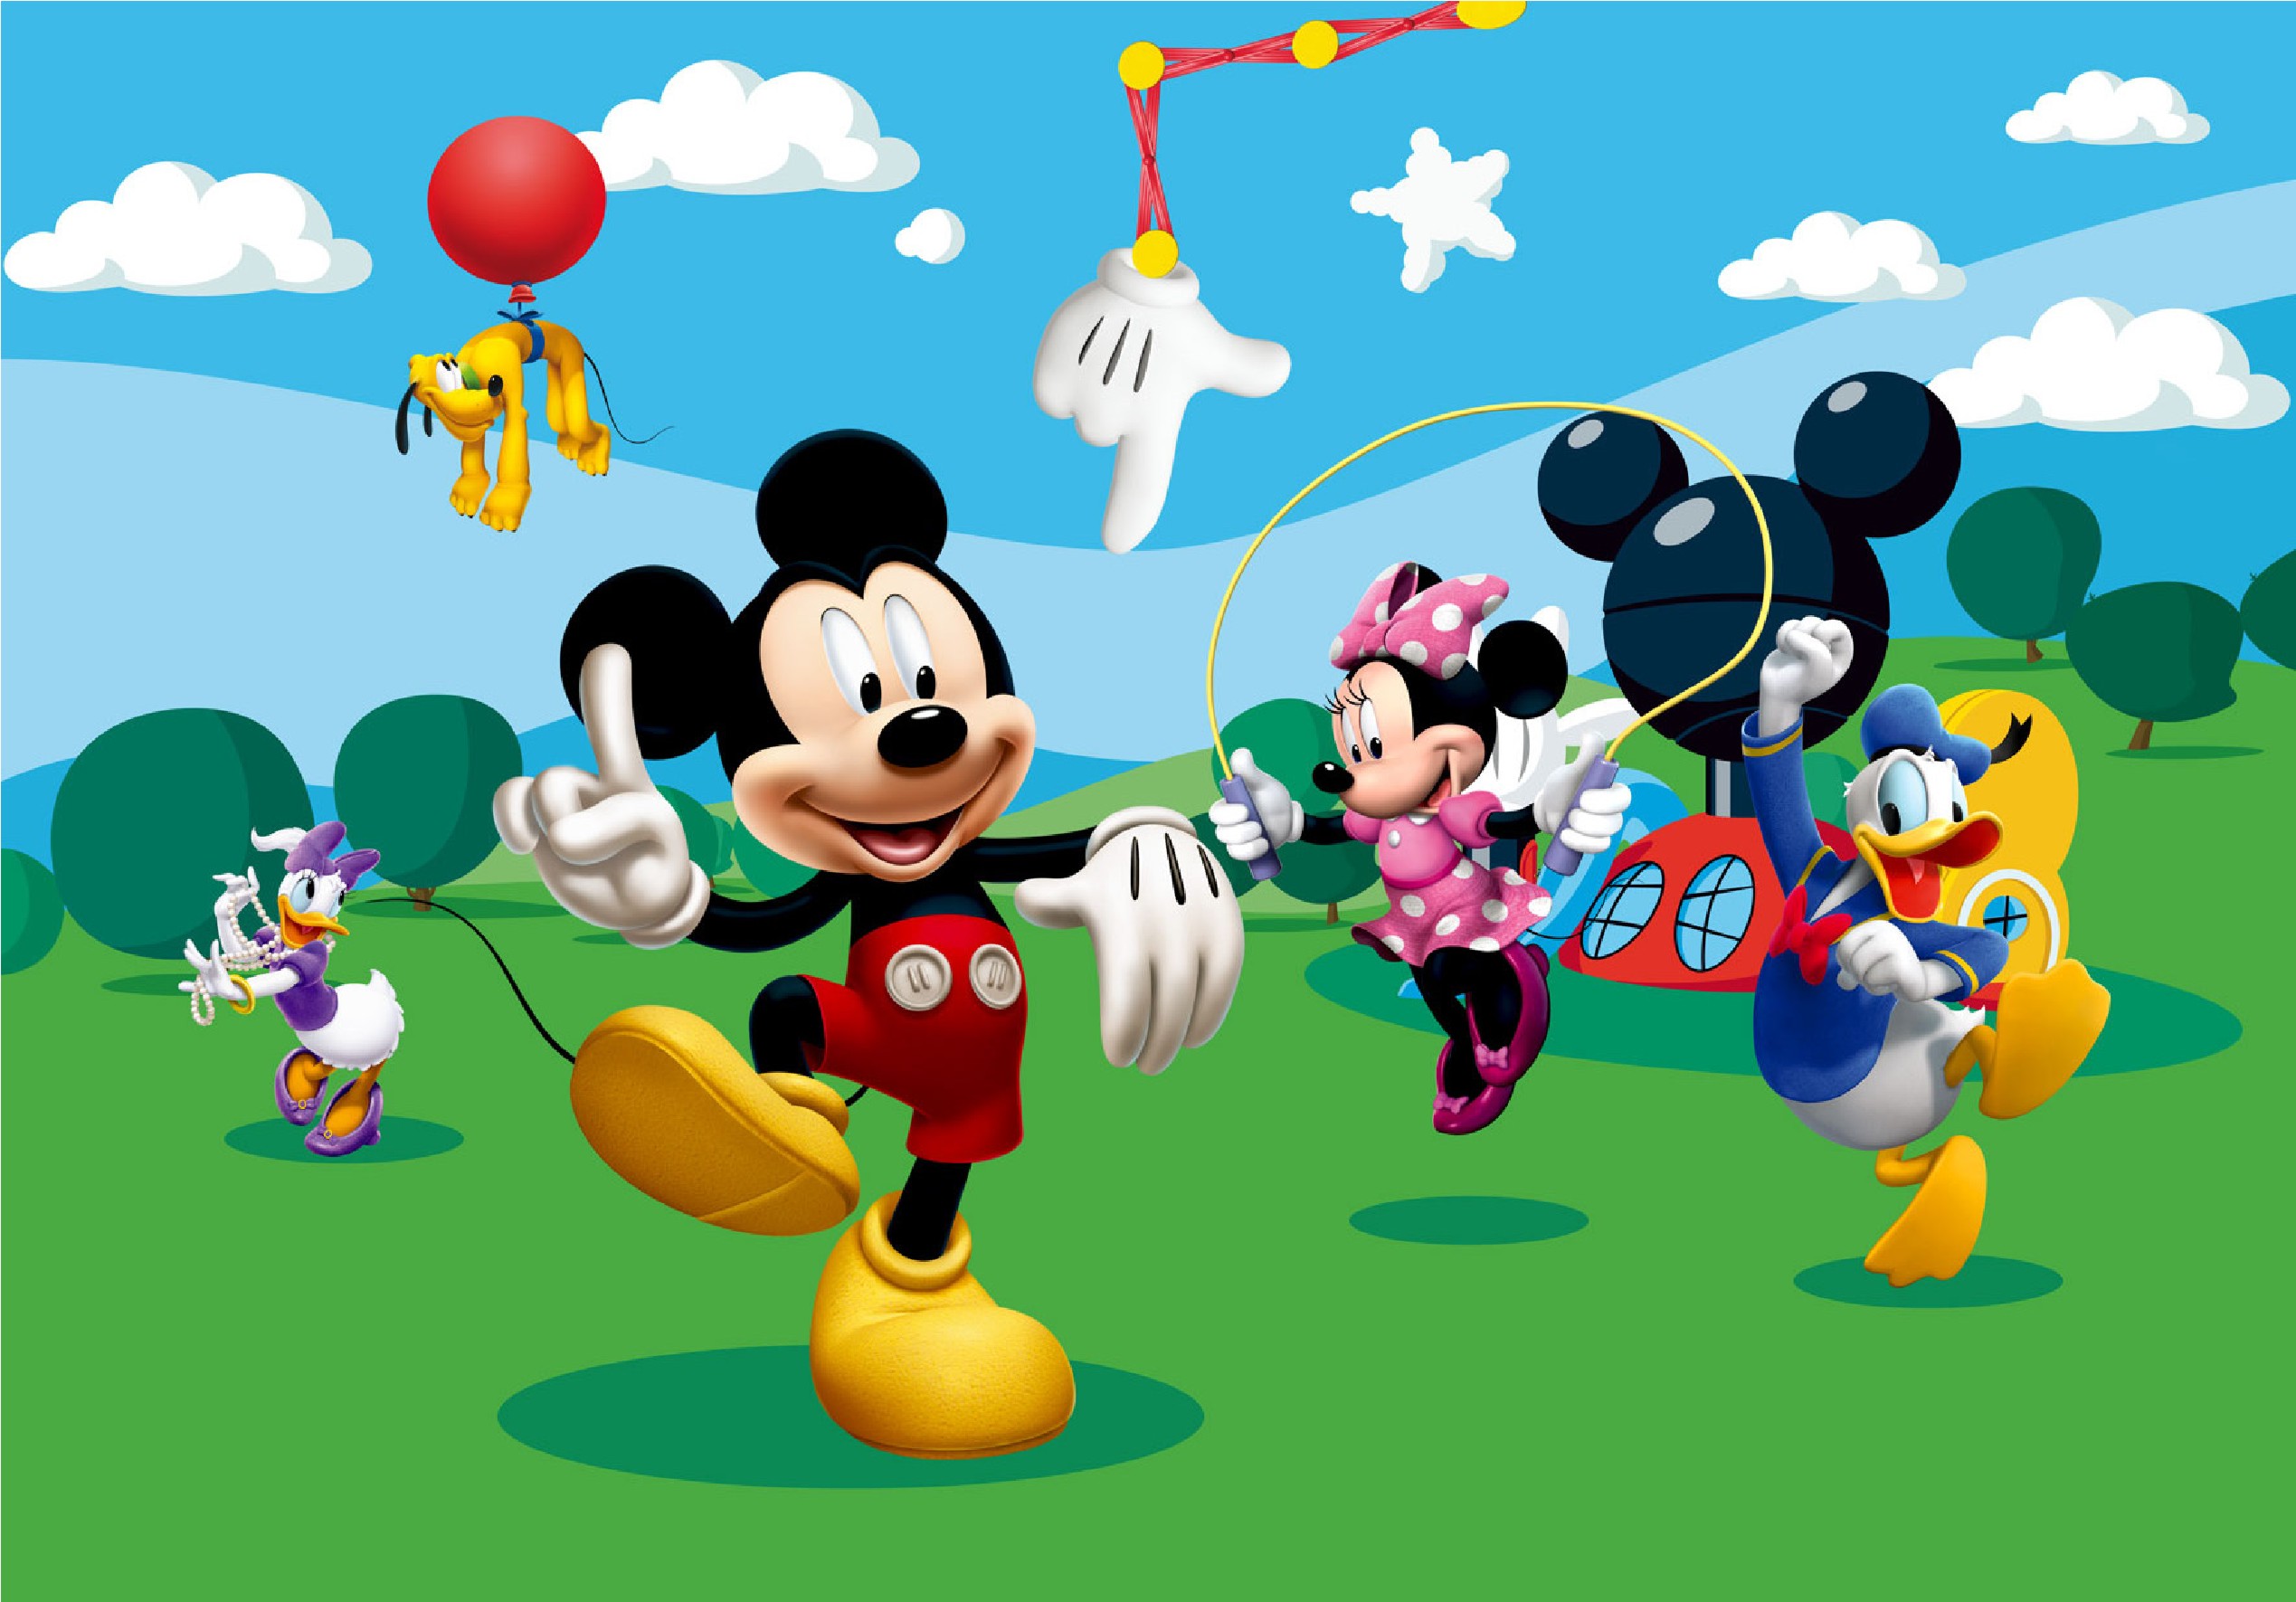 Mickey Mouse BirtHDay Wallpaper The Art Mad